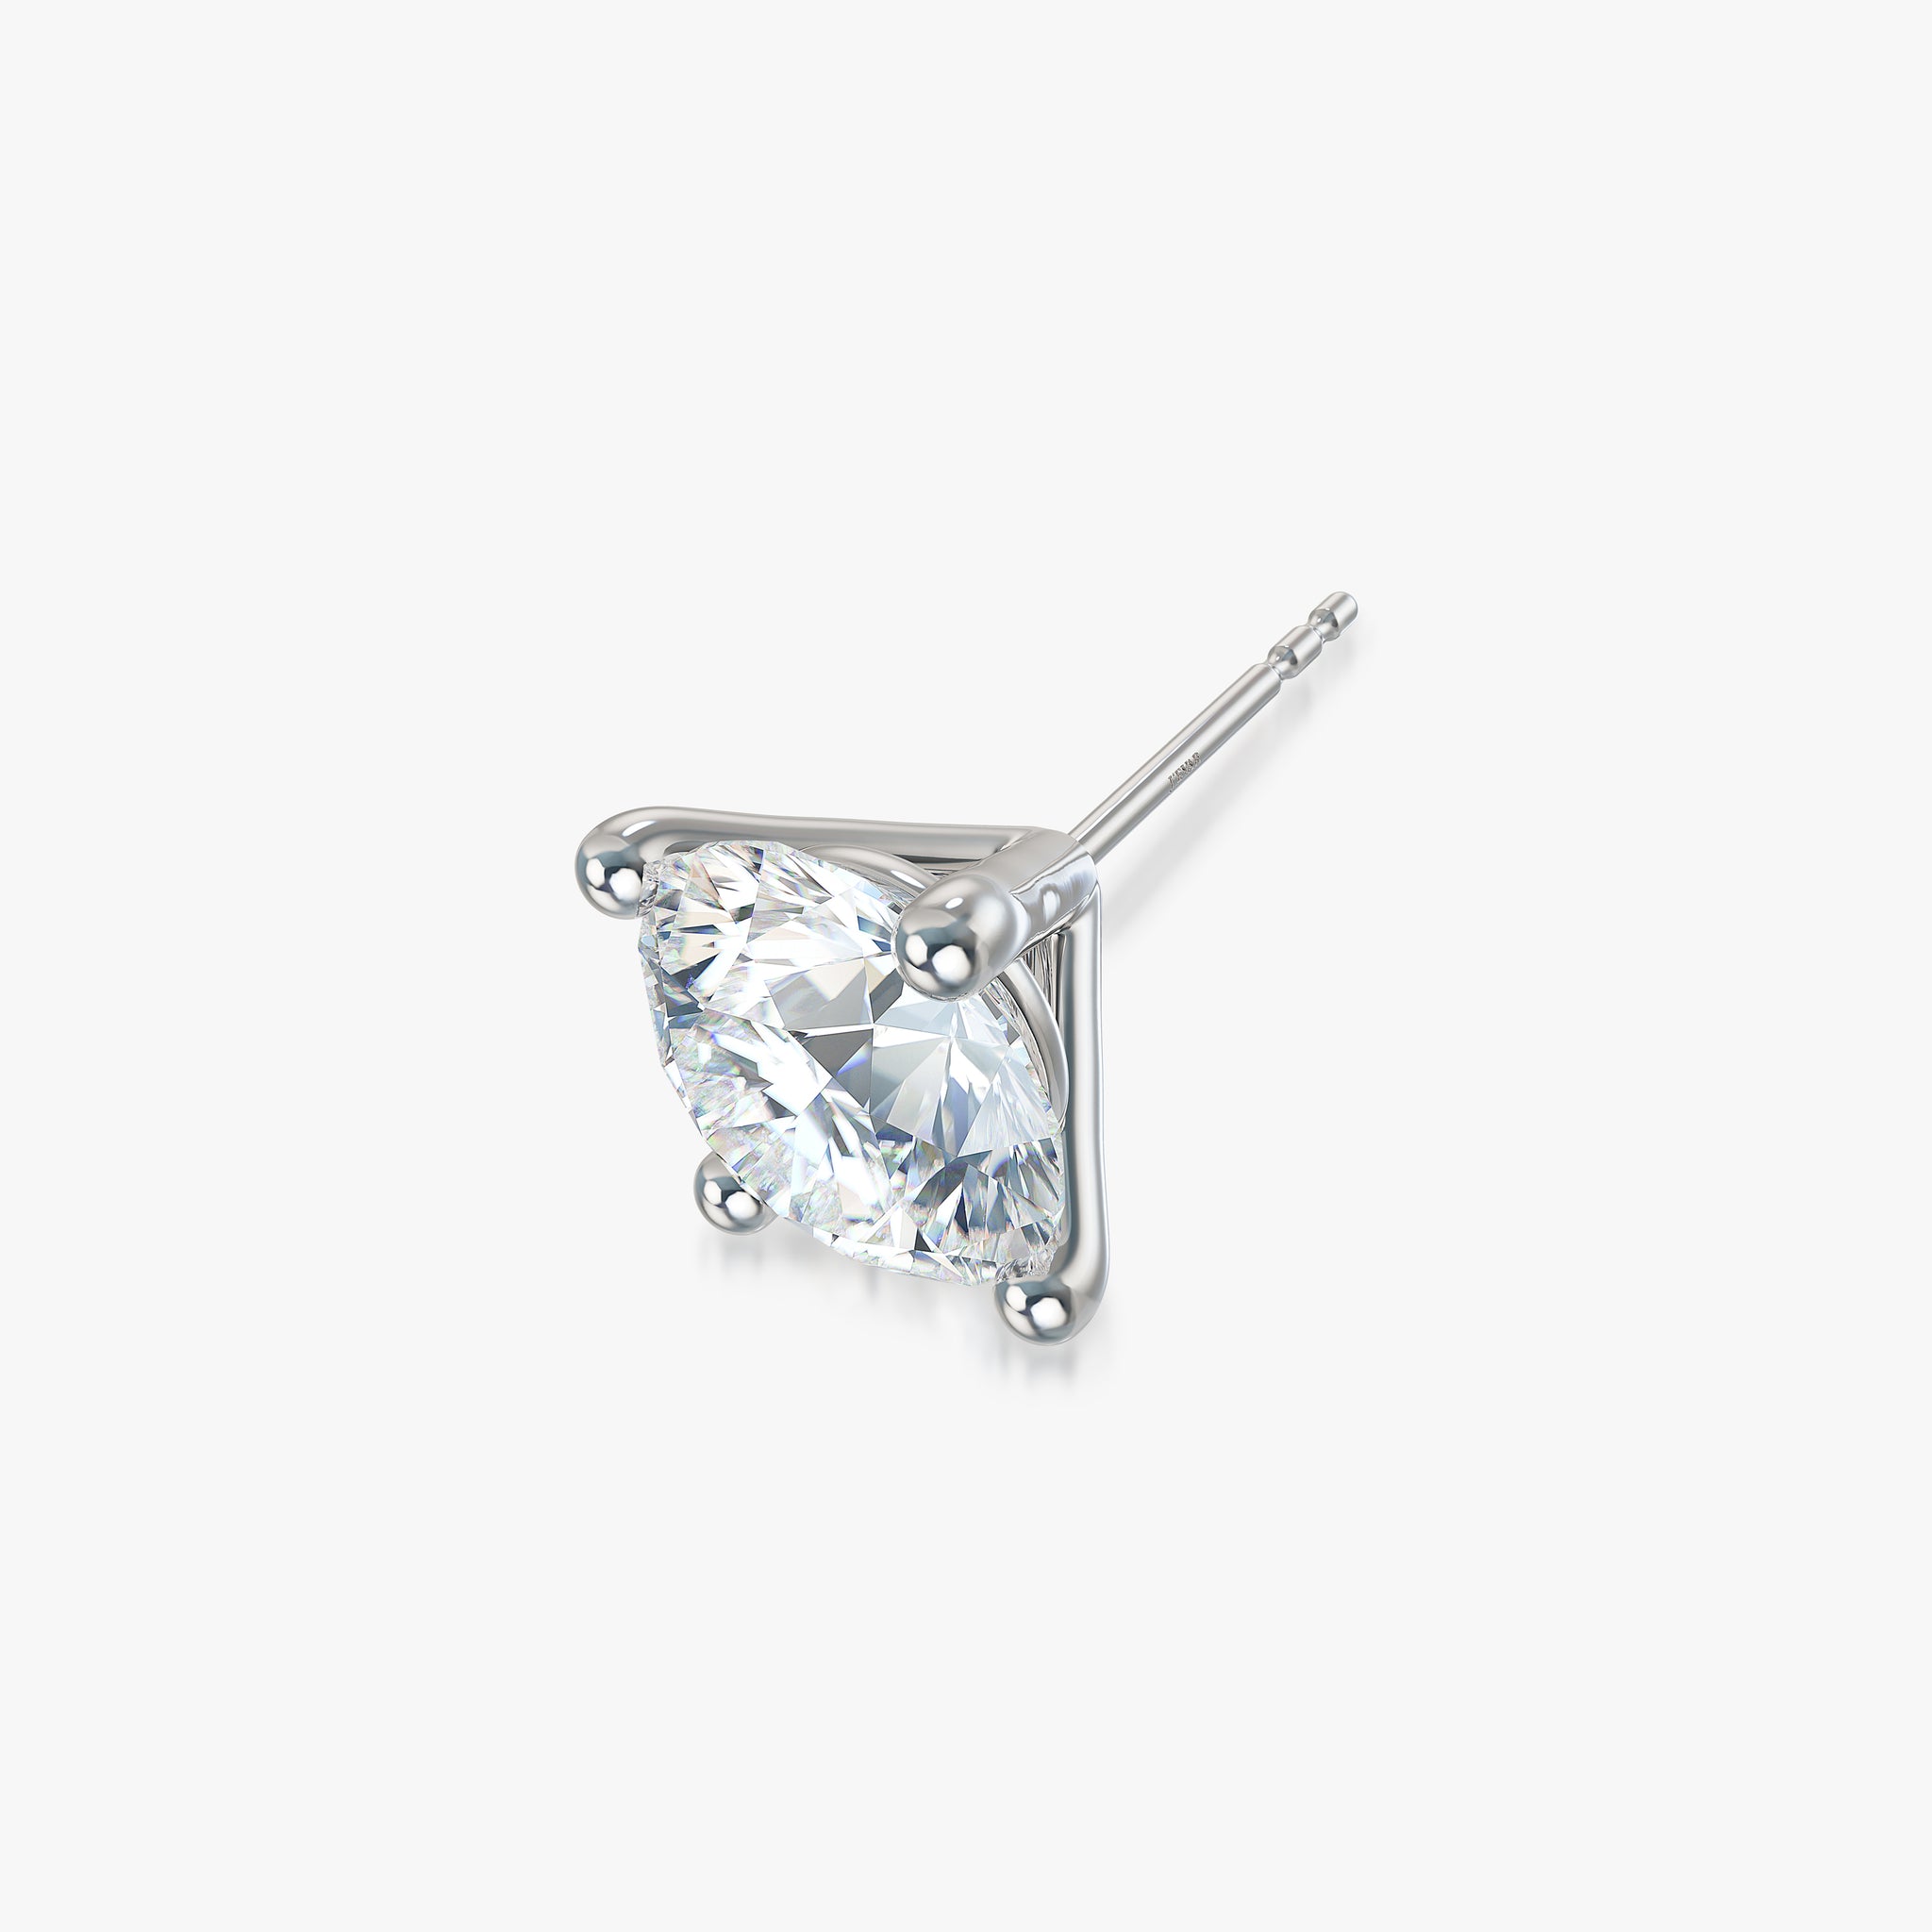 J'EVAR 18KT White Gold ALTR Lab Grown Diamond Single Stud Earring with Guardian Backs Perspective View